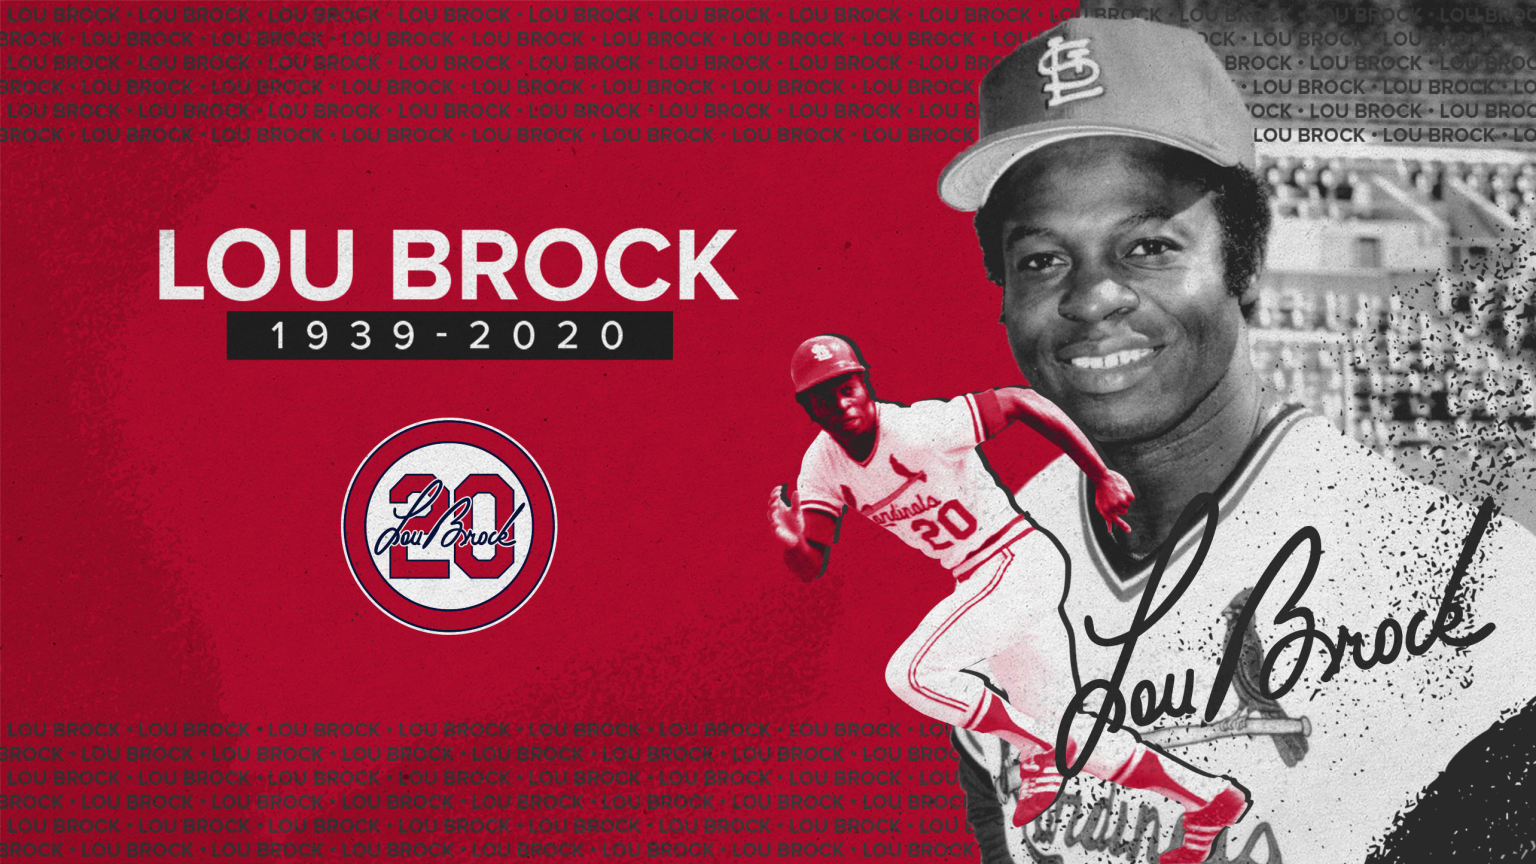 Statement from Lou Brock Jr.